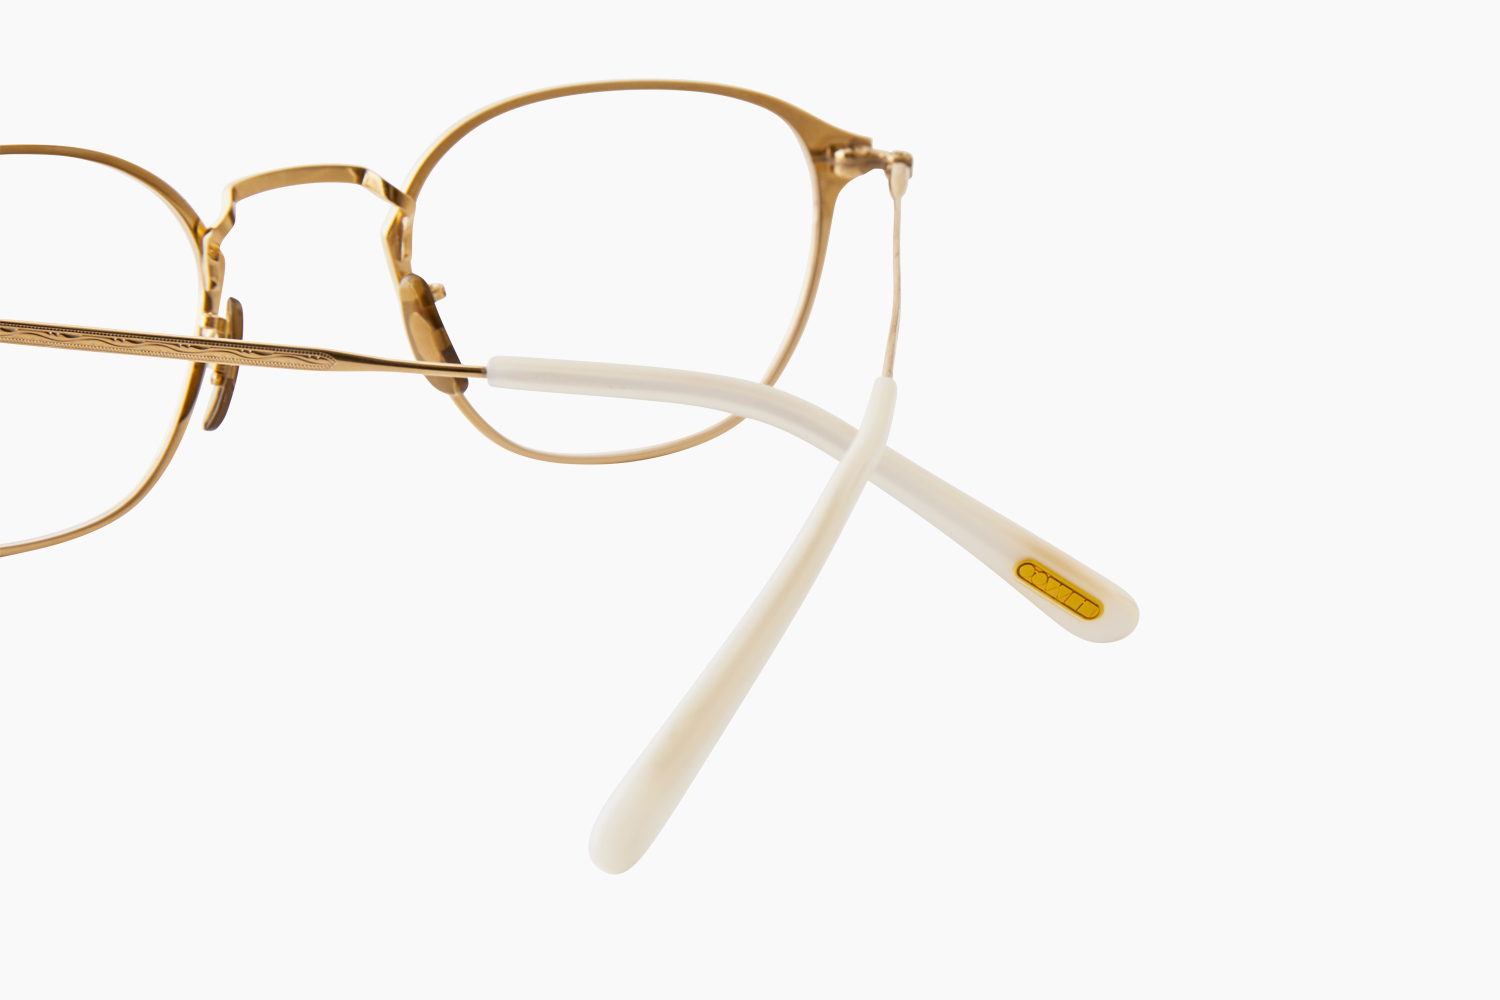 Dayson - WHT｜OLIVER PEOPLES